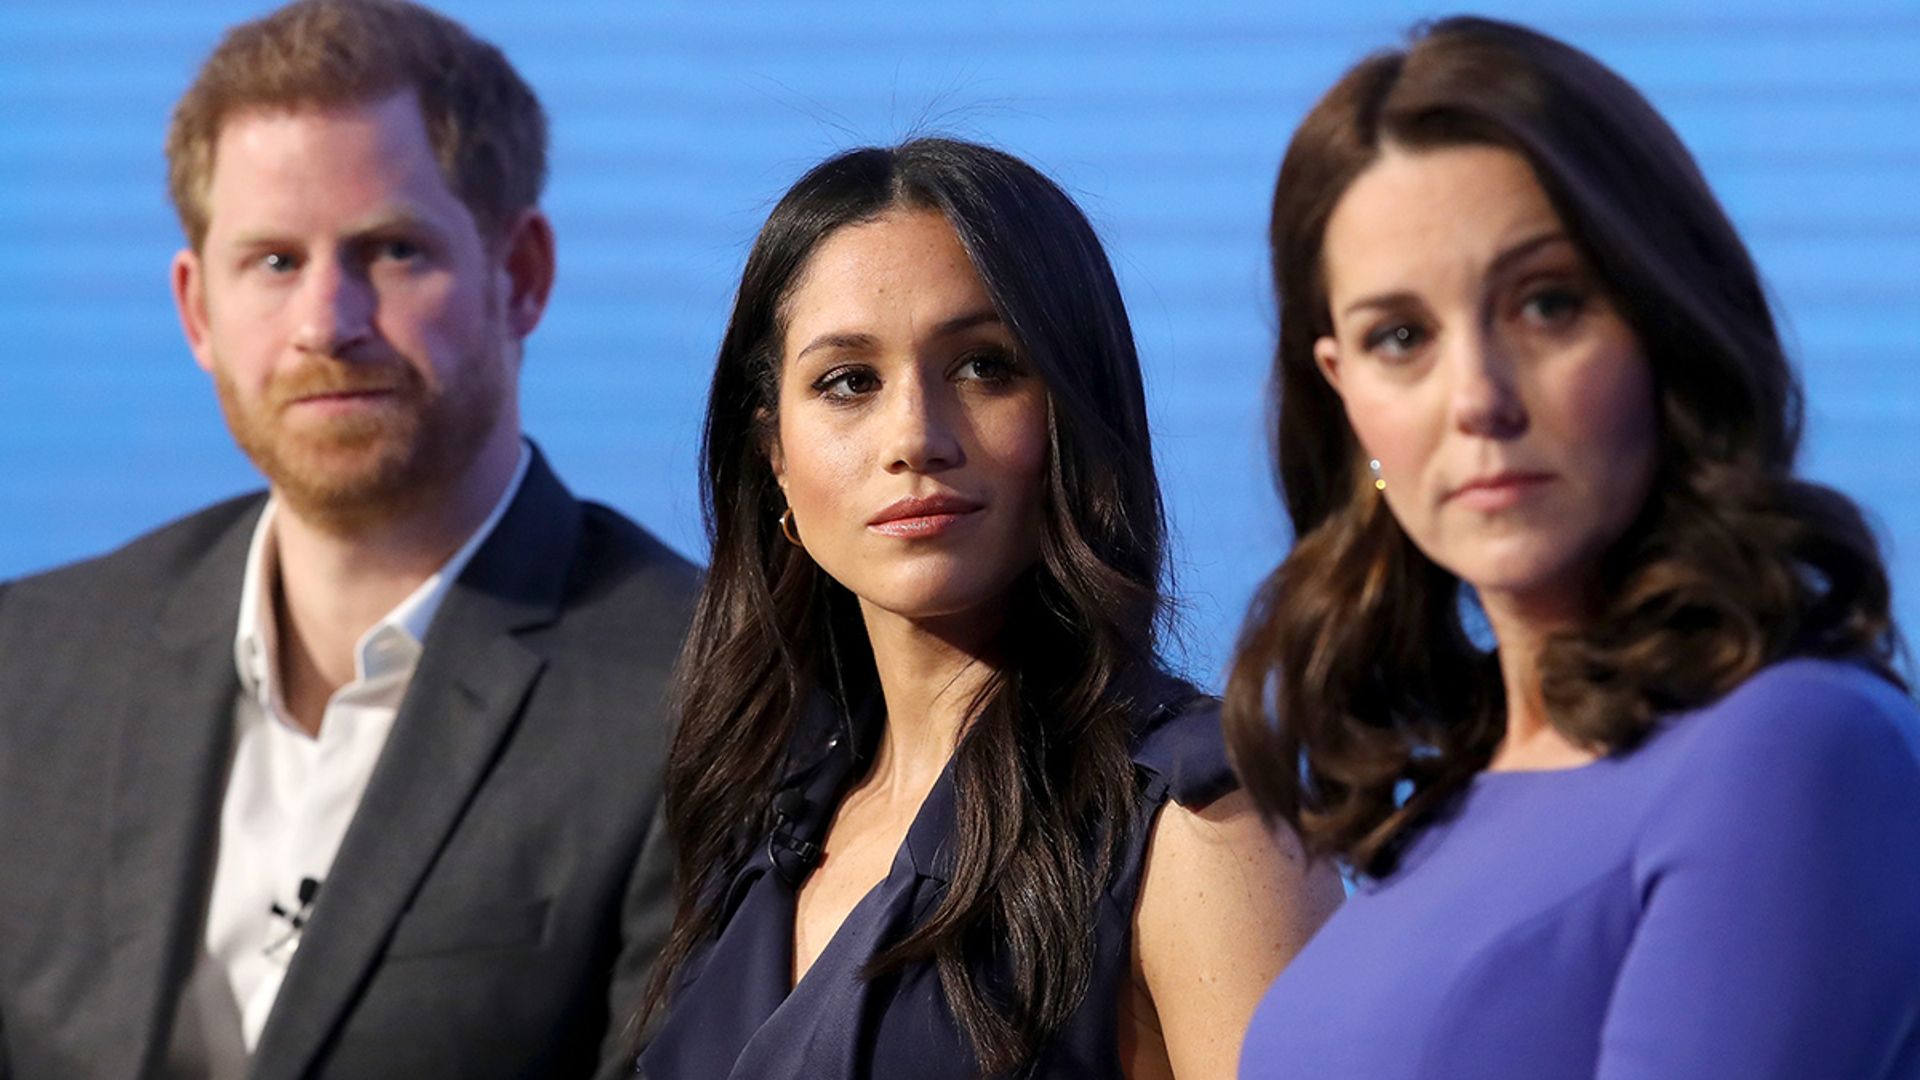 Meghan Markle 'DID make Kate Middleton cry' in dress row after